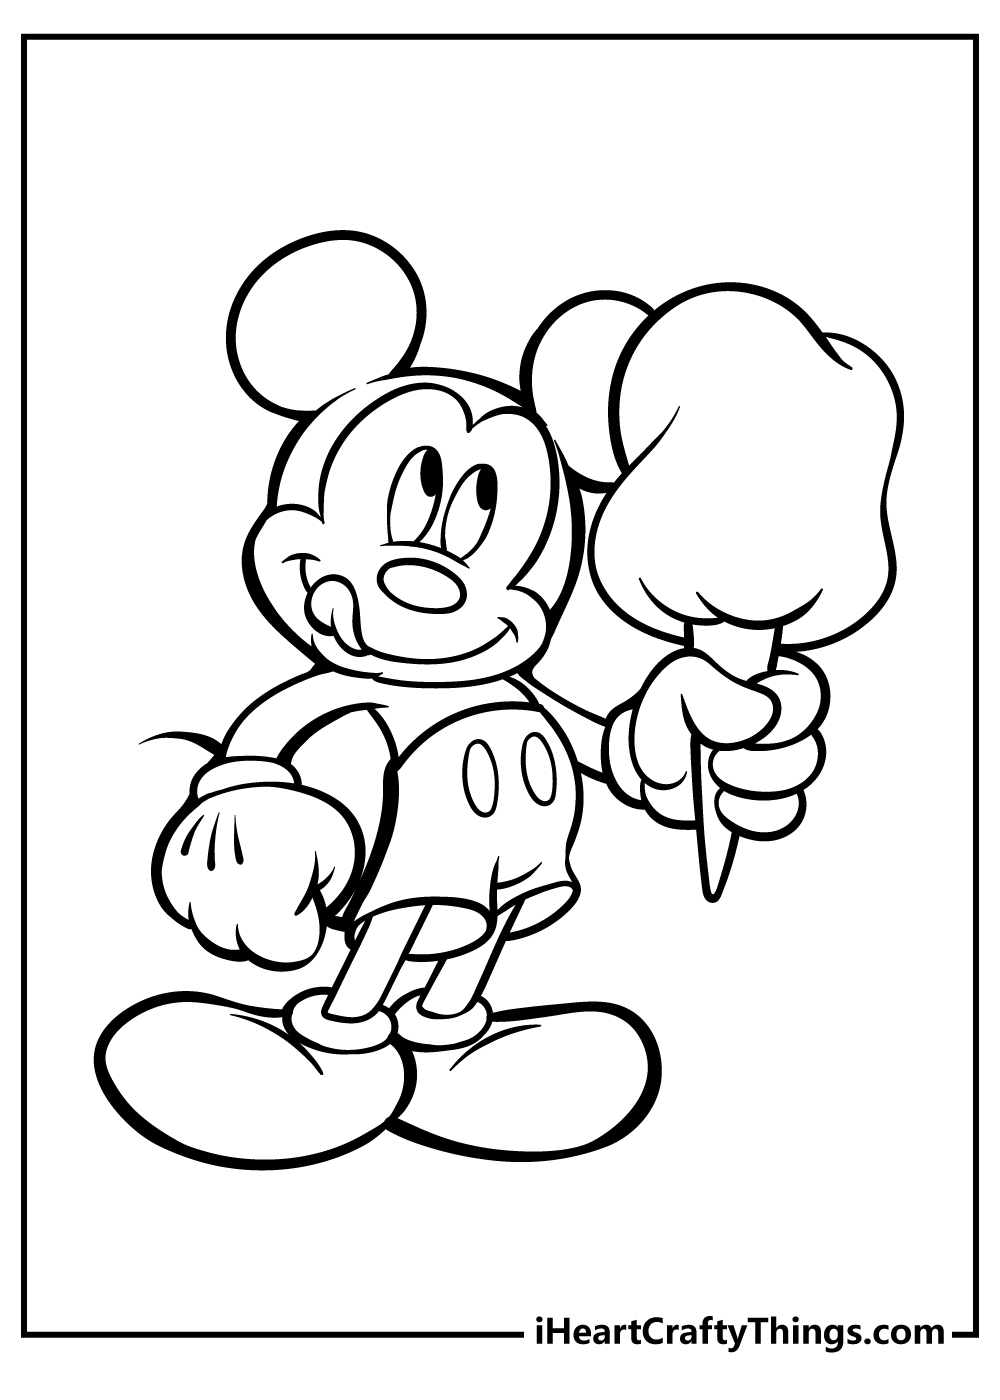 Mickey Mouse Coloring Pages for kids free download